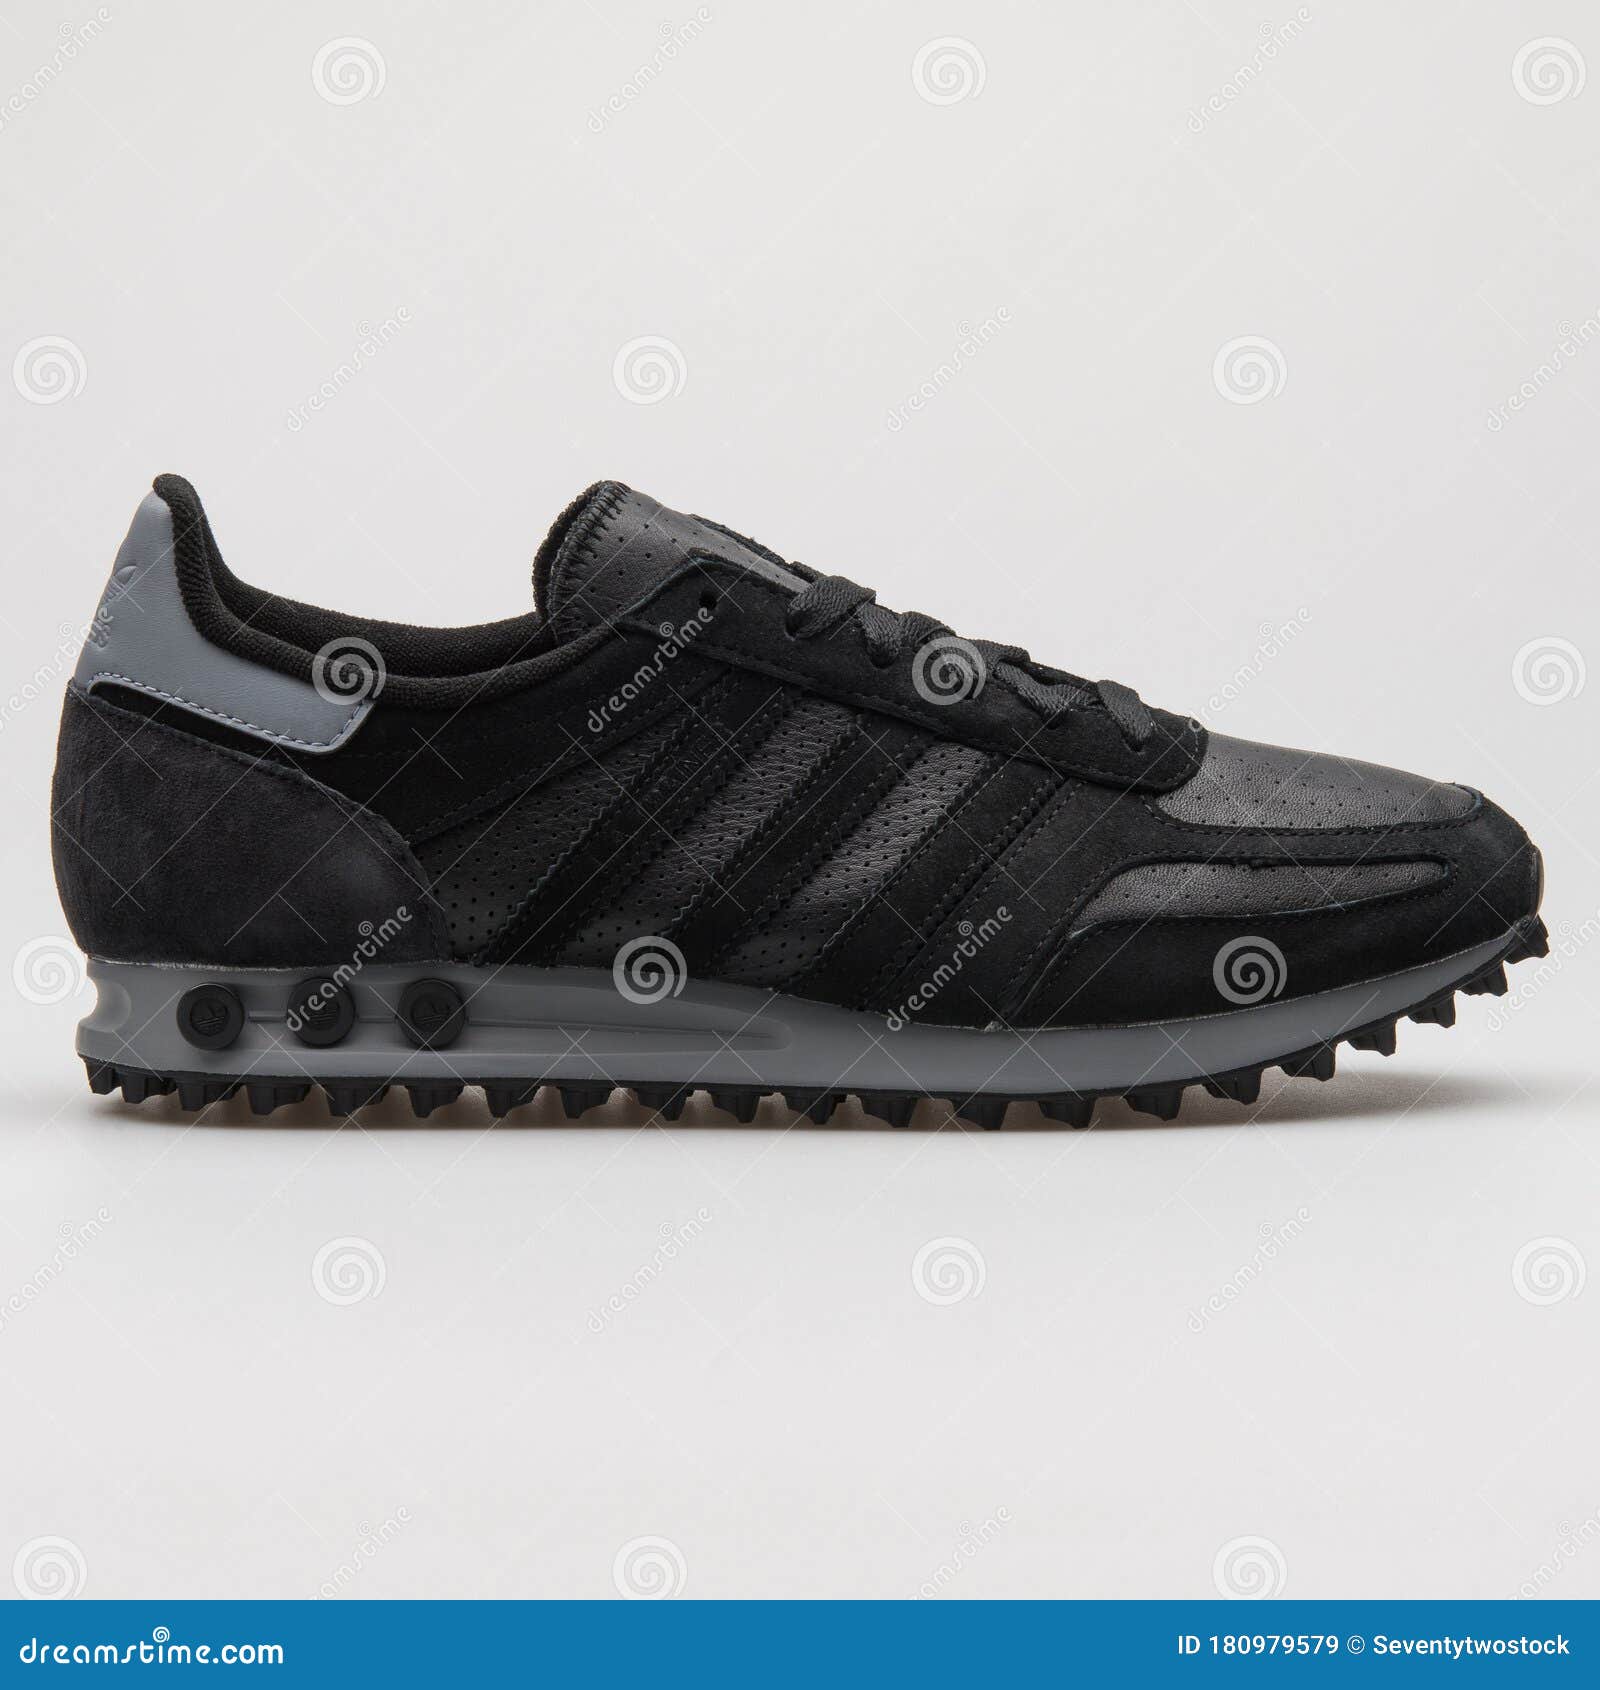 Adidas La Trainer Black and Grey Sneaker Editorial Stock Image - of sneakers, accessories: 180979579